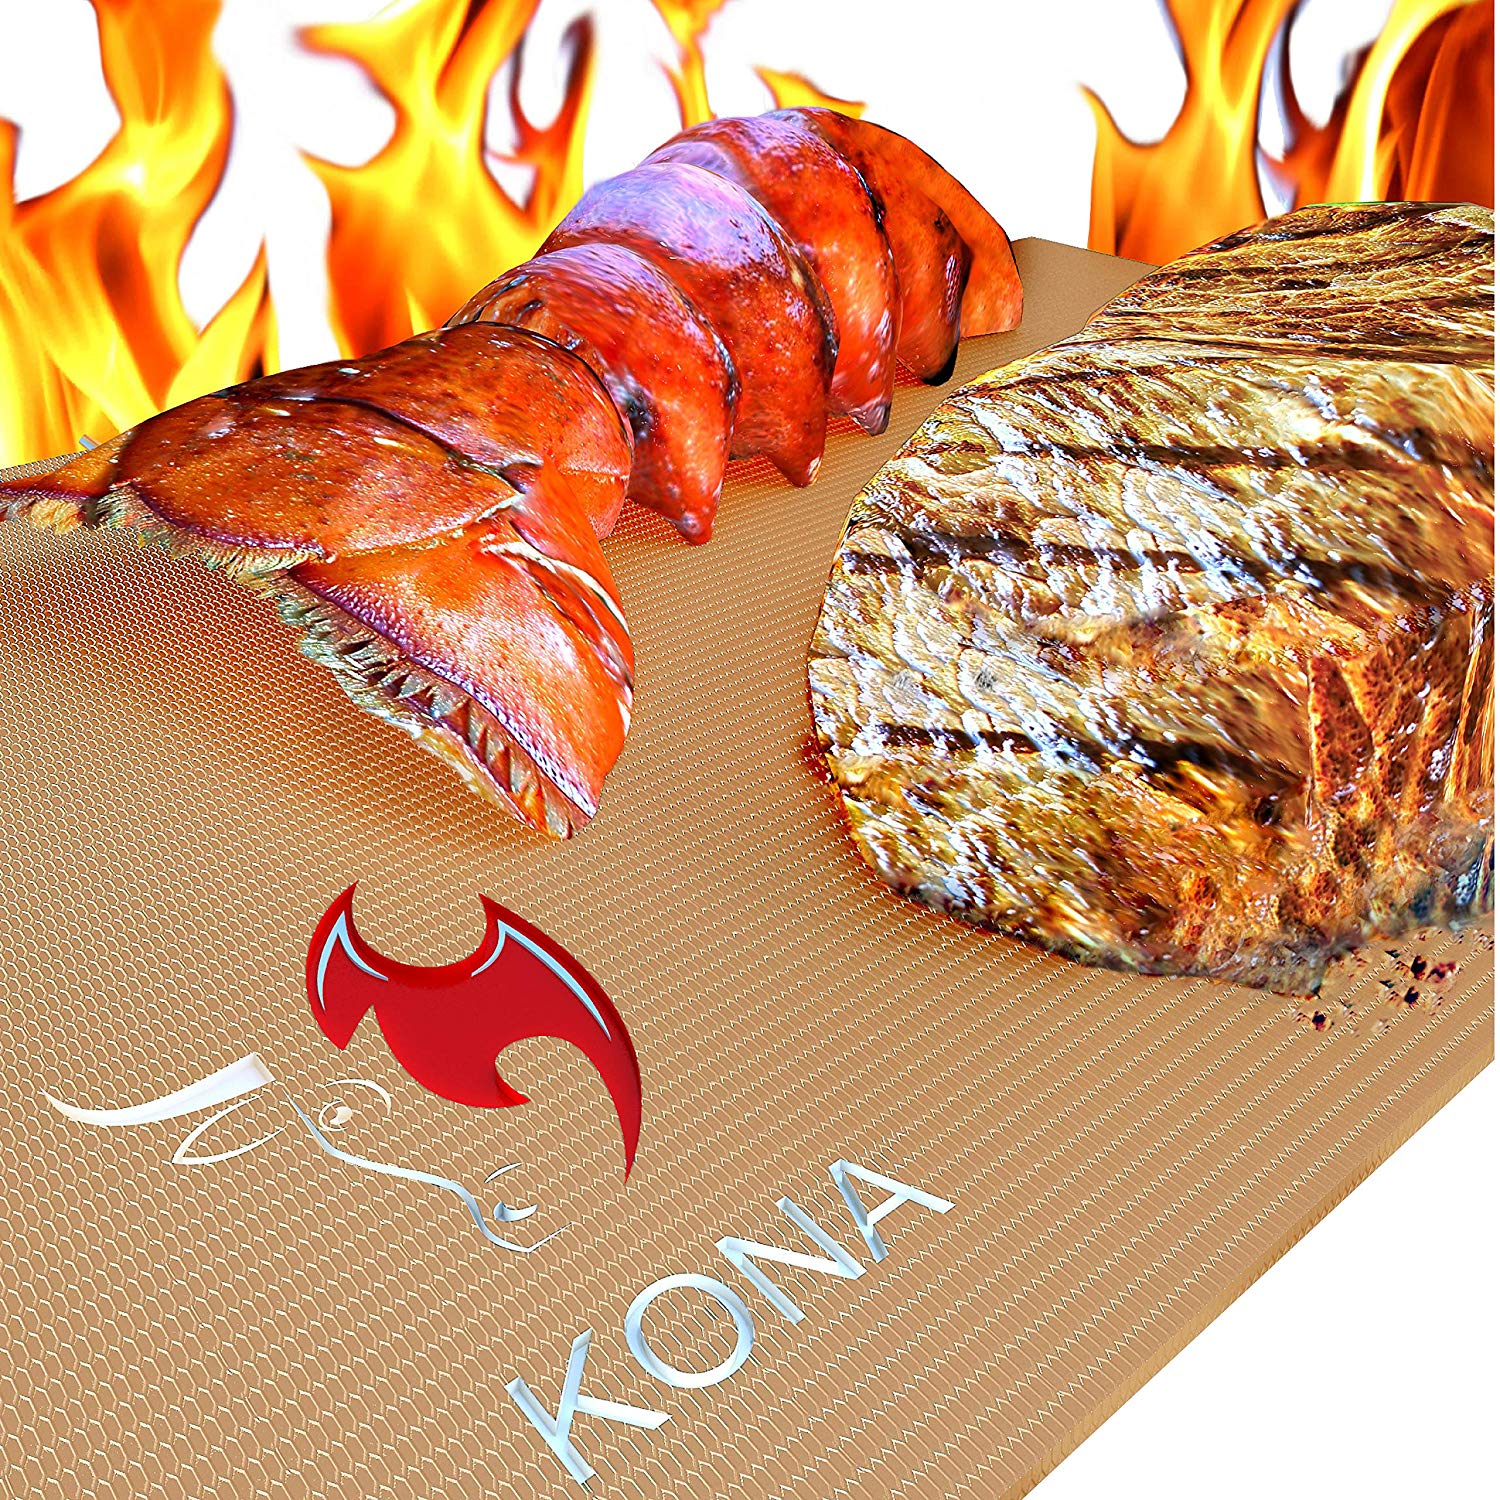 Kona Copper Grill Mats Non Stick BBQ and Oven Sheets Set of 2, 16"x13" - image 1 of 7